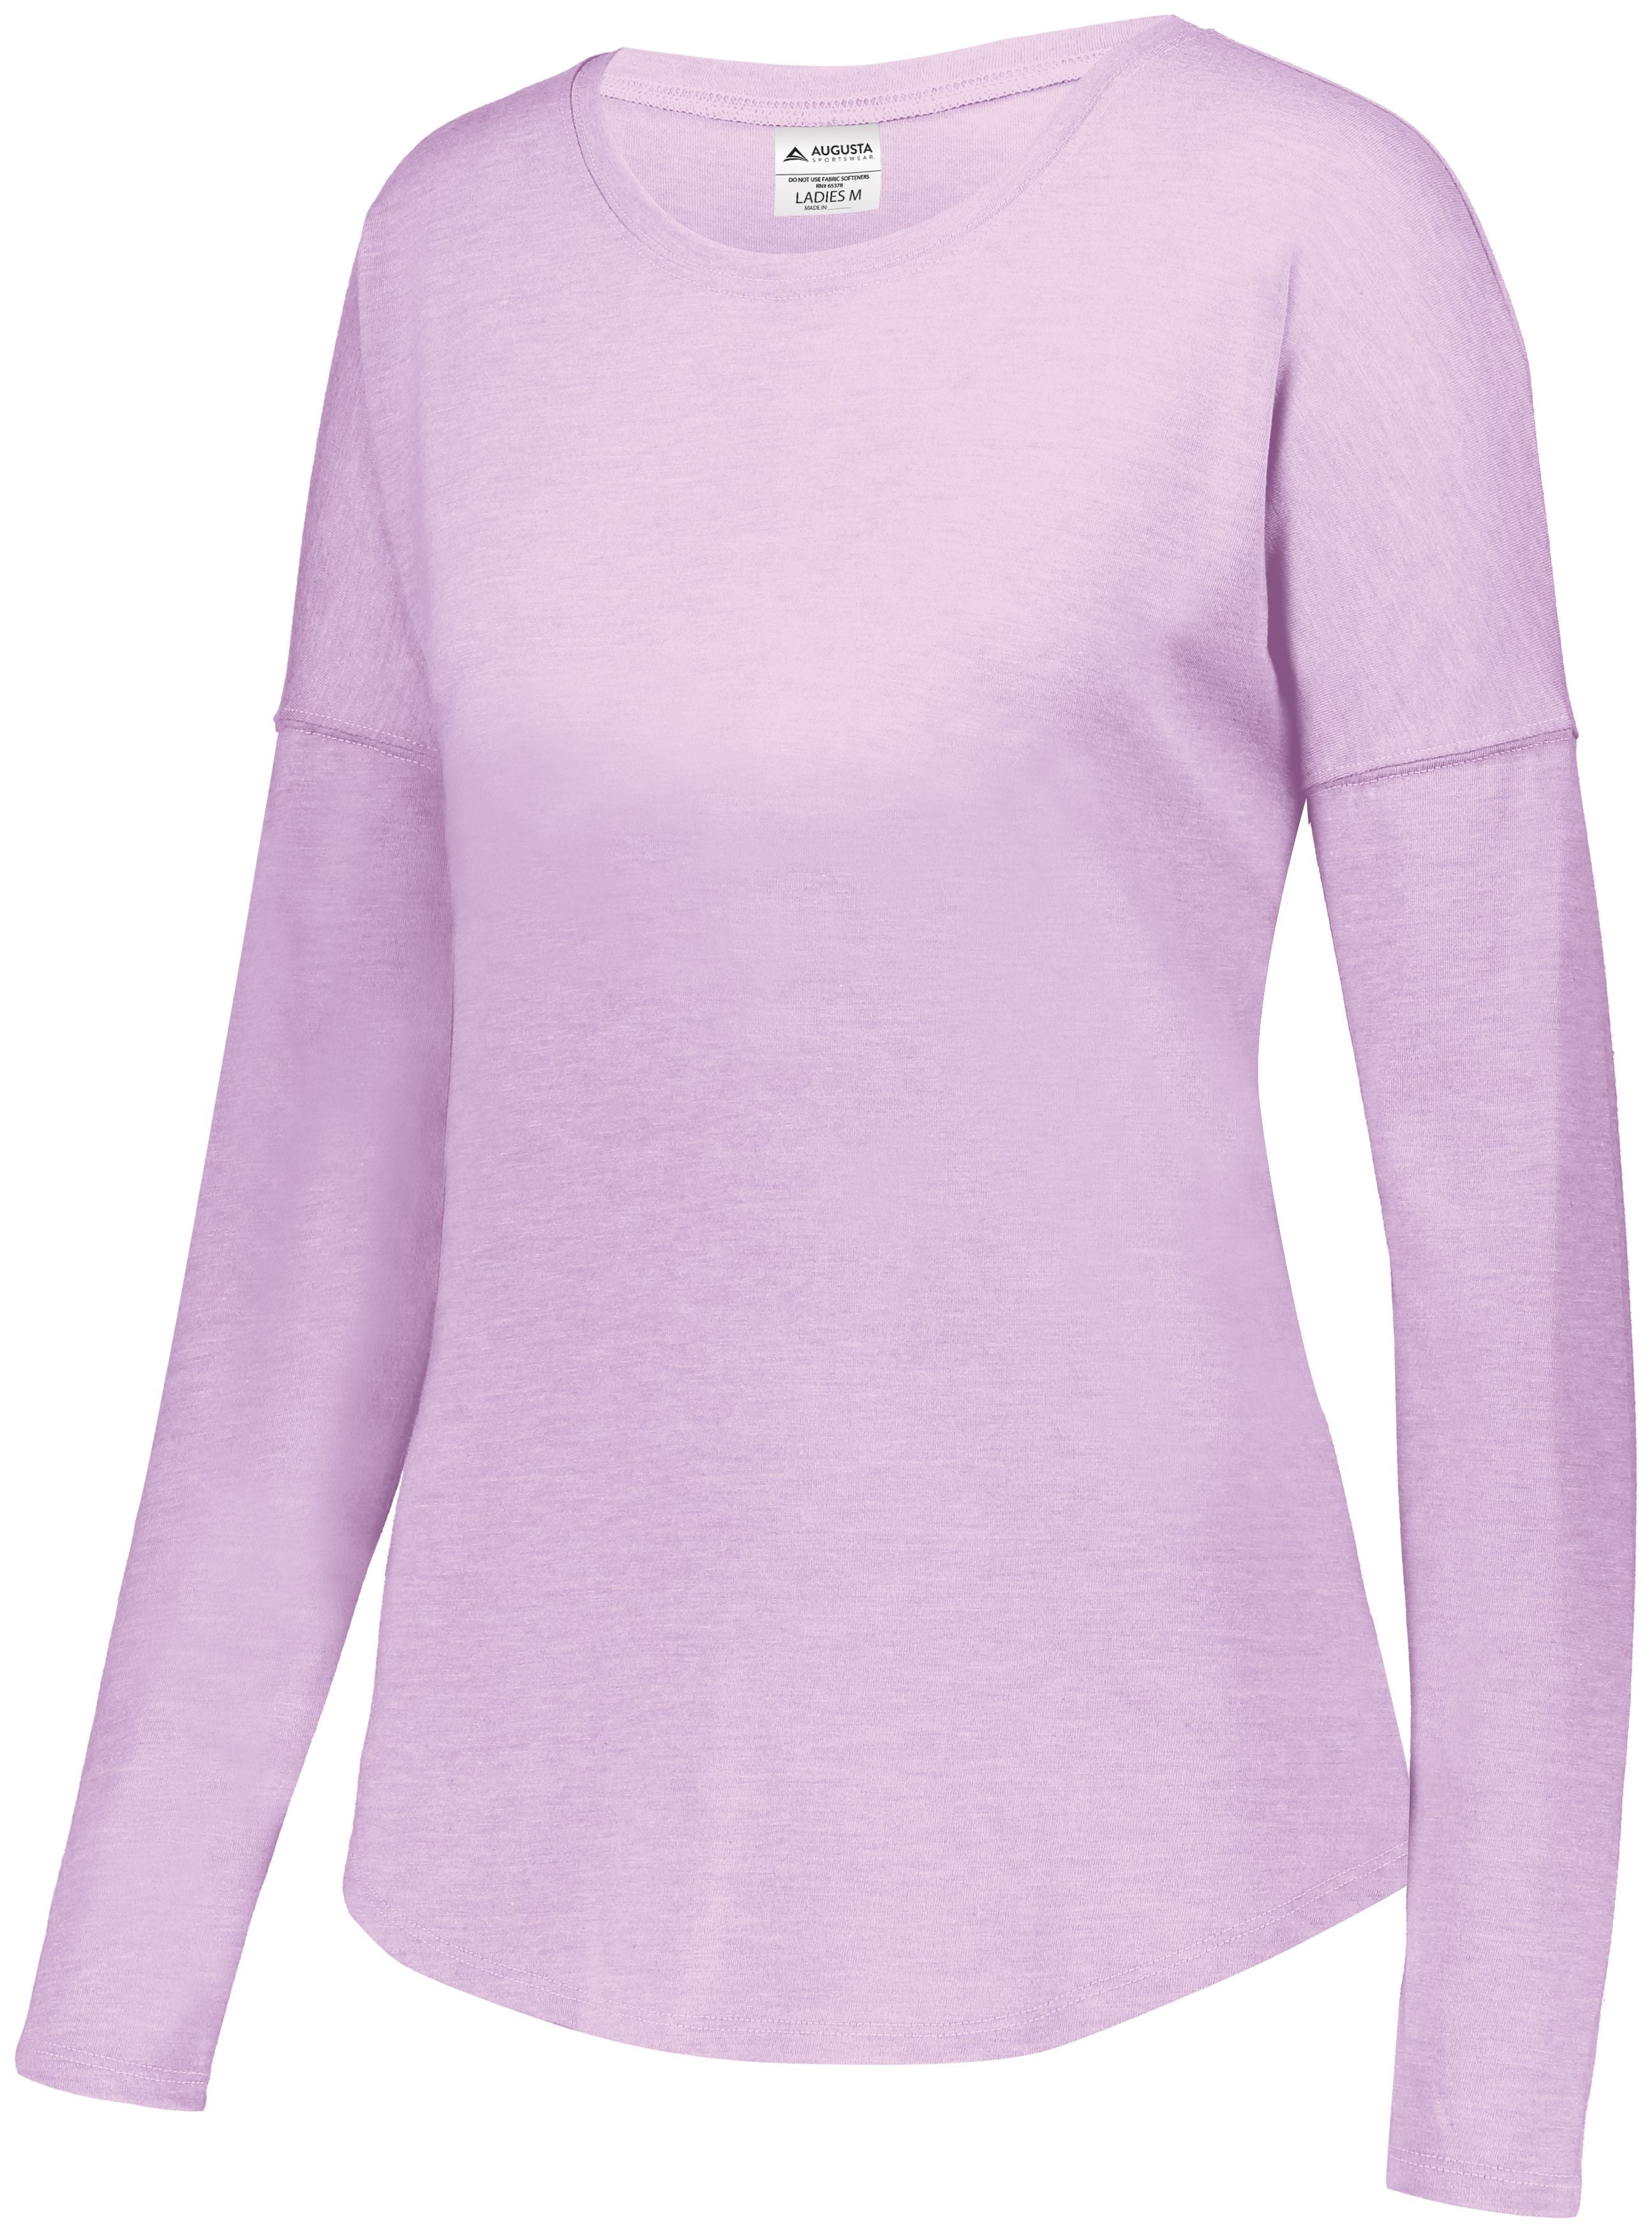 Augusta Sportswear Ladies Lux Tri-Blend Long Sleeve Shirt in Light Lavender Heather  -Part of the Ladies, Augusta-Products, Shirts product lines at KanaleyCreations.com